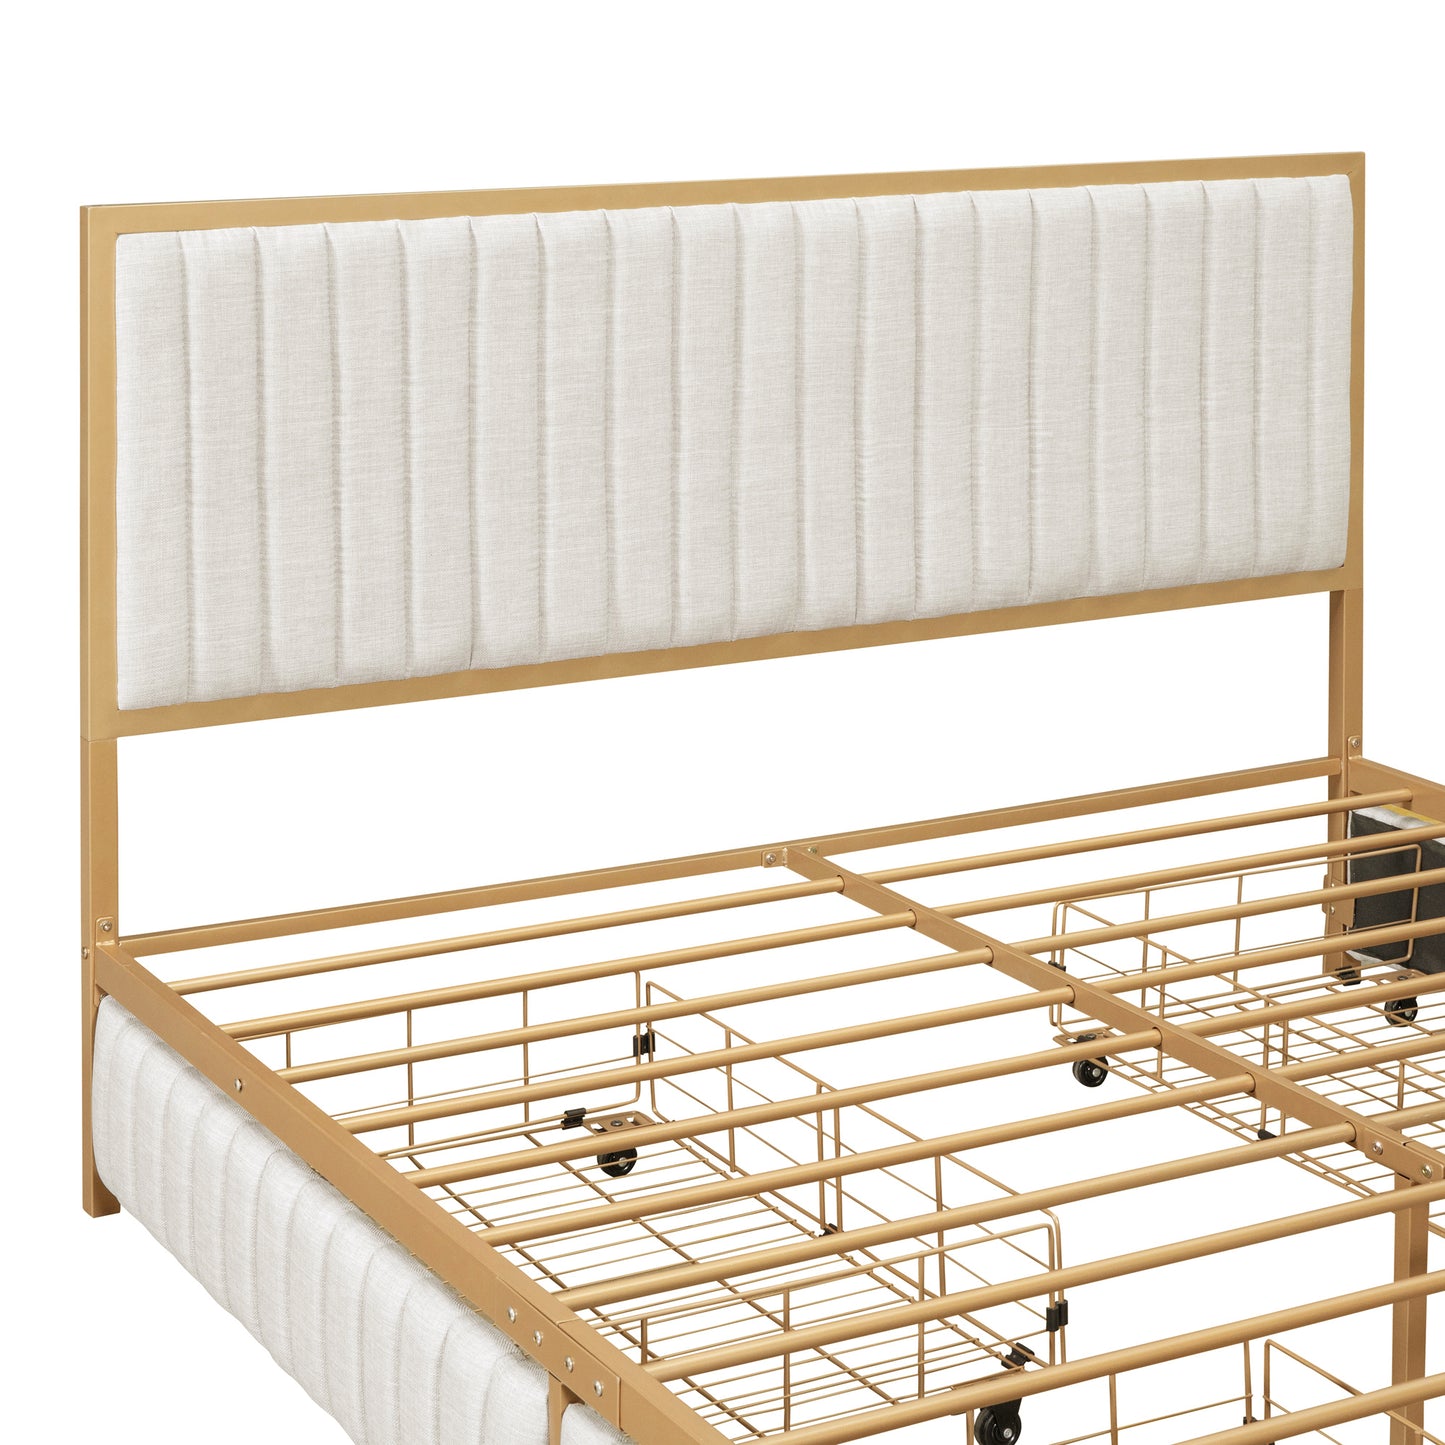 Queen Size Metal Frame Upholstered Platform Bed with 4 Drawers, Linen Fabric, Beige